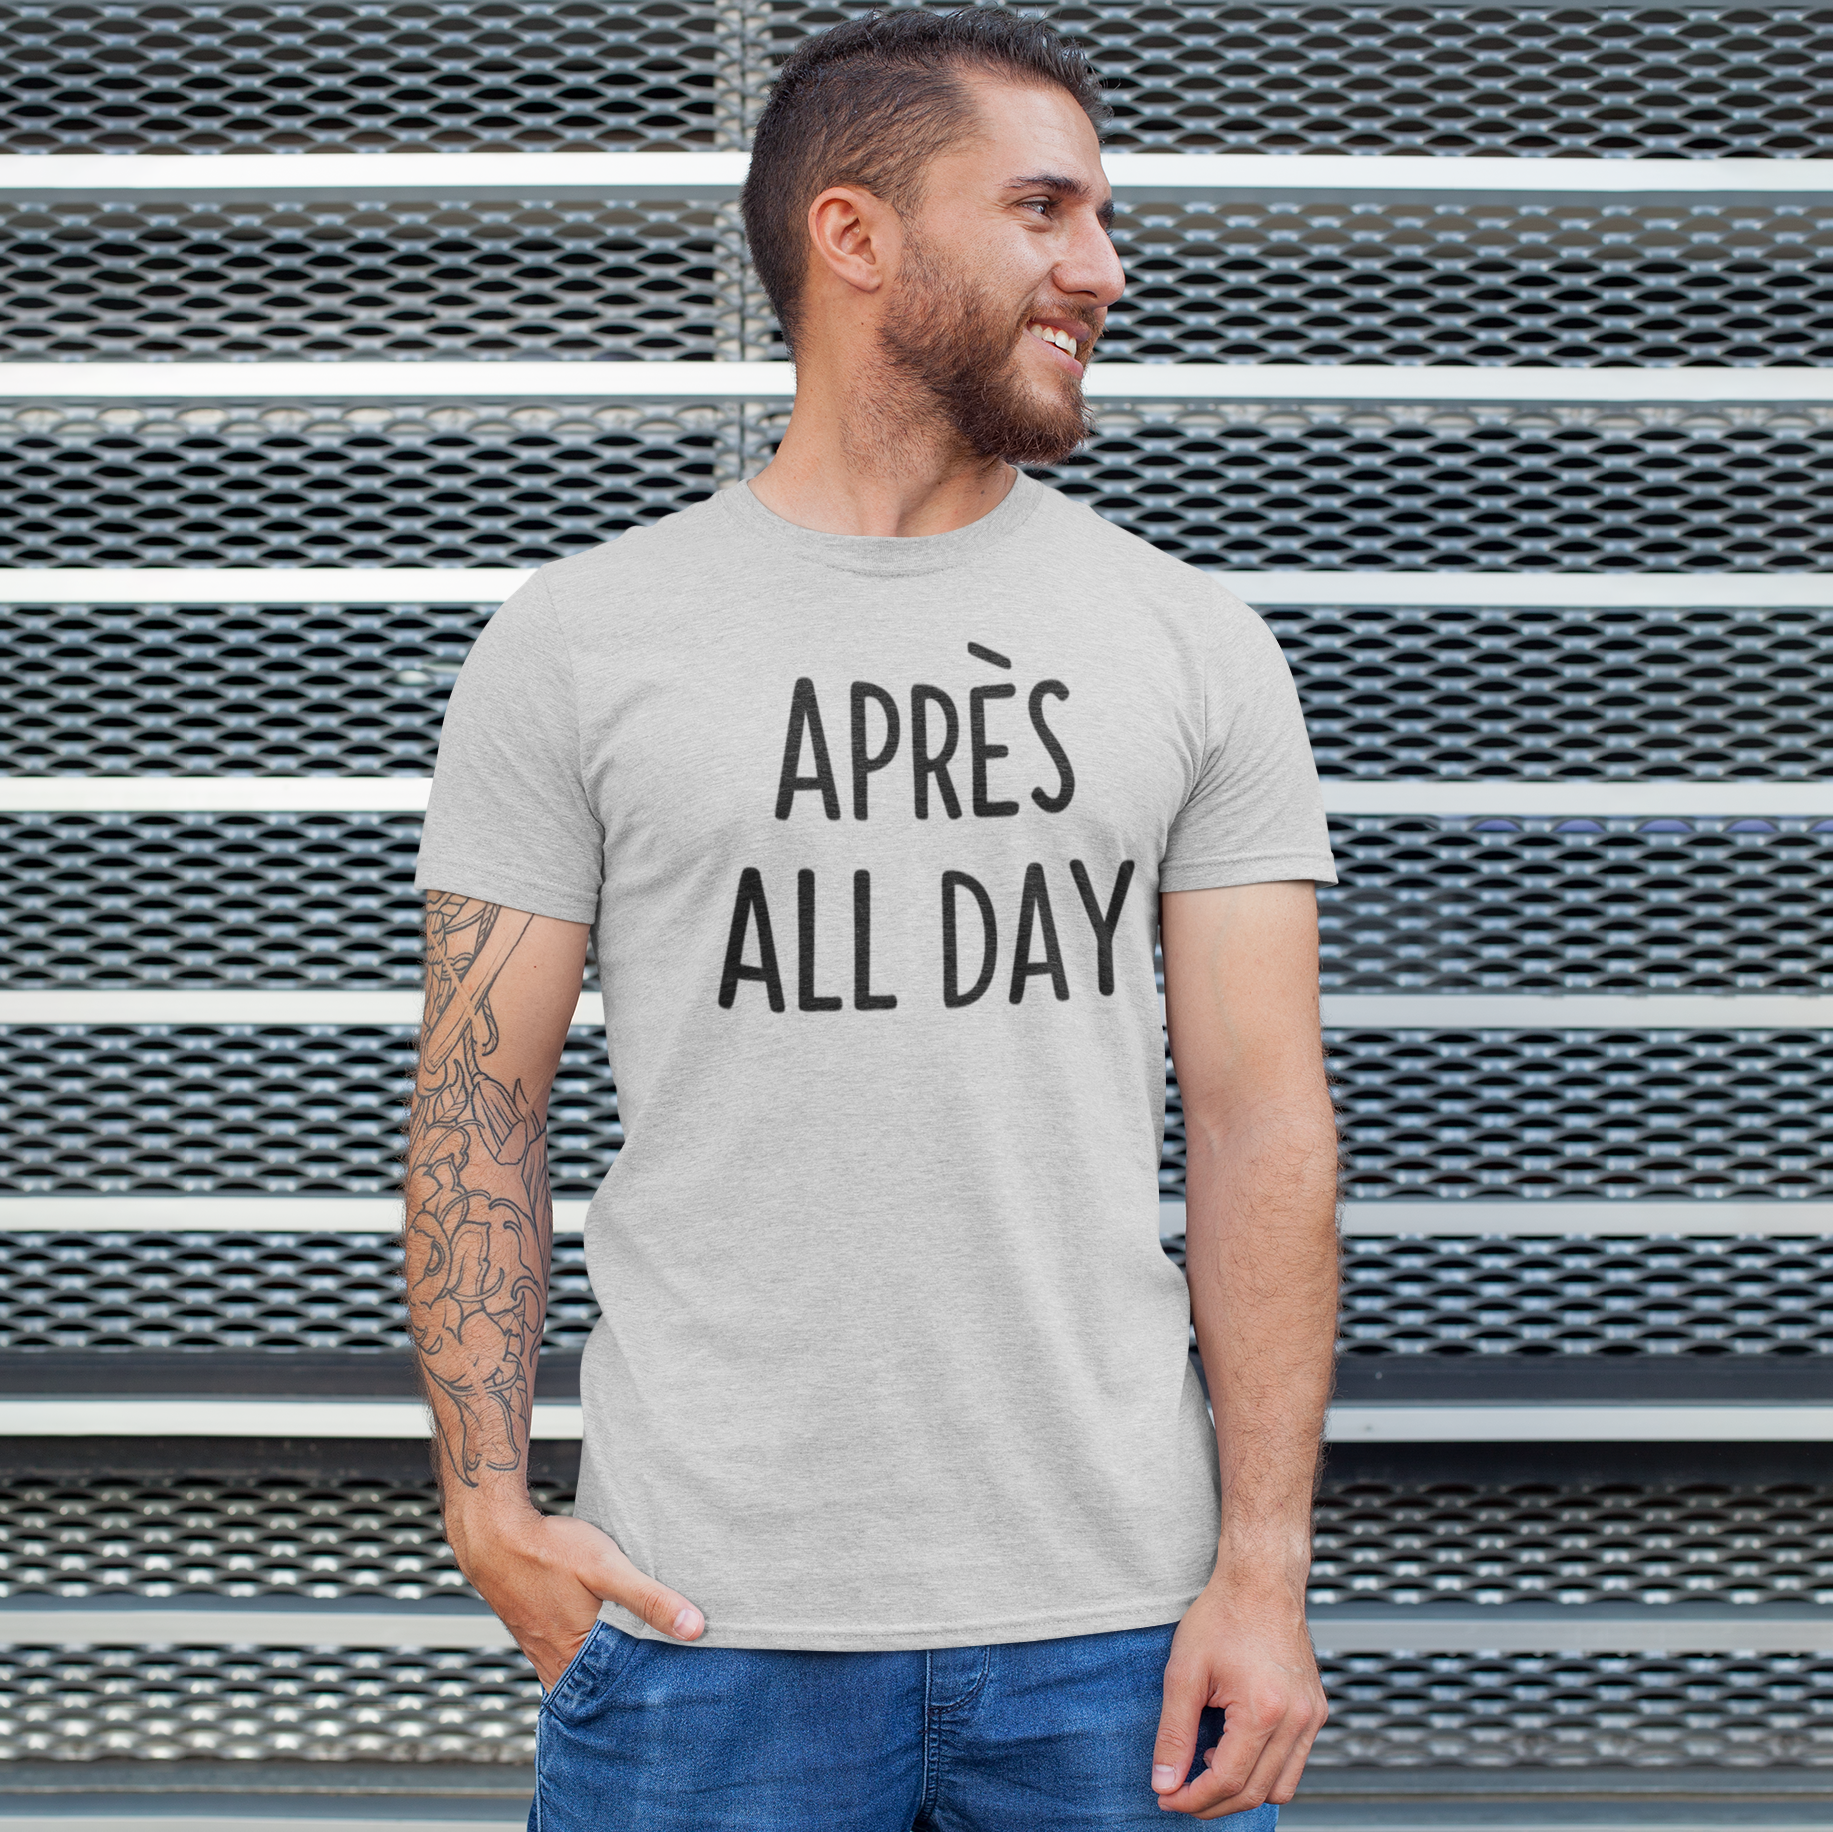 Man with beard and tattoo wearing heather grey shirt with 'Après all day' print by KMLeon, looking to the side.